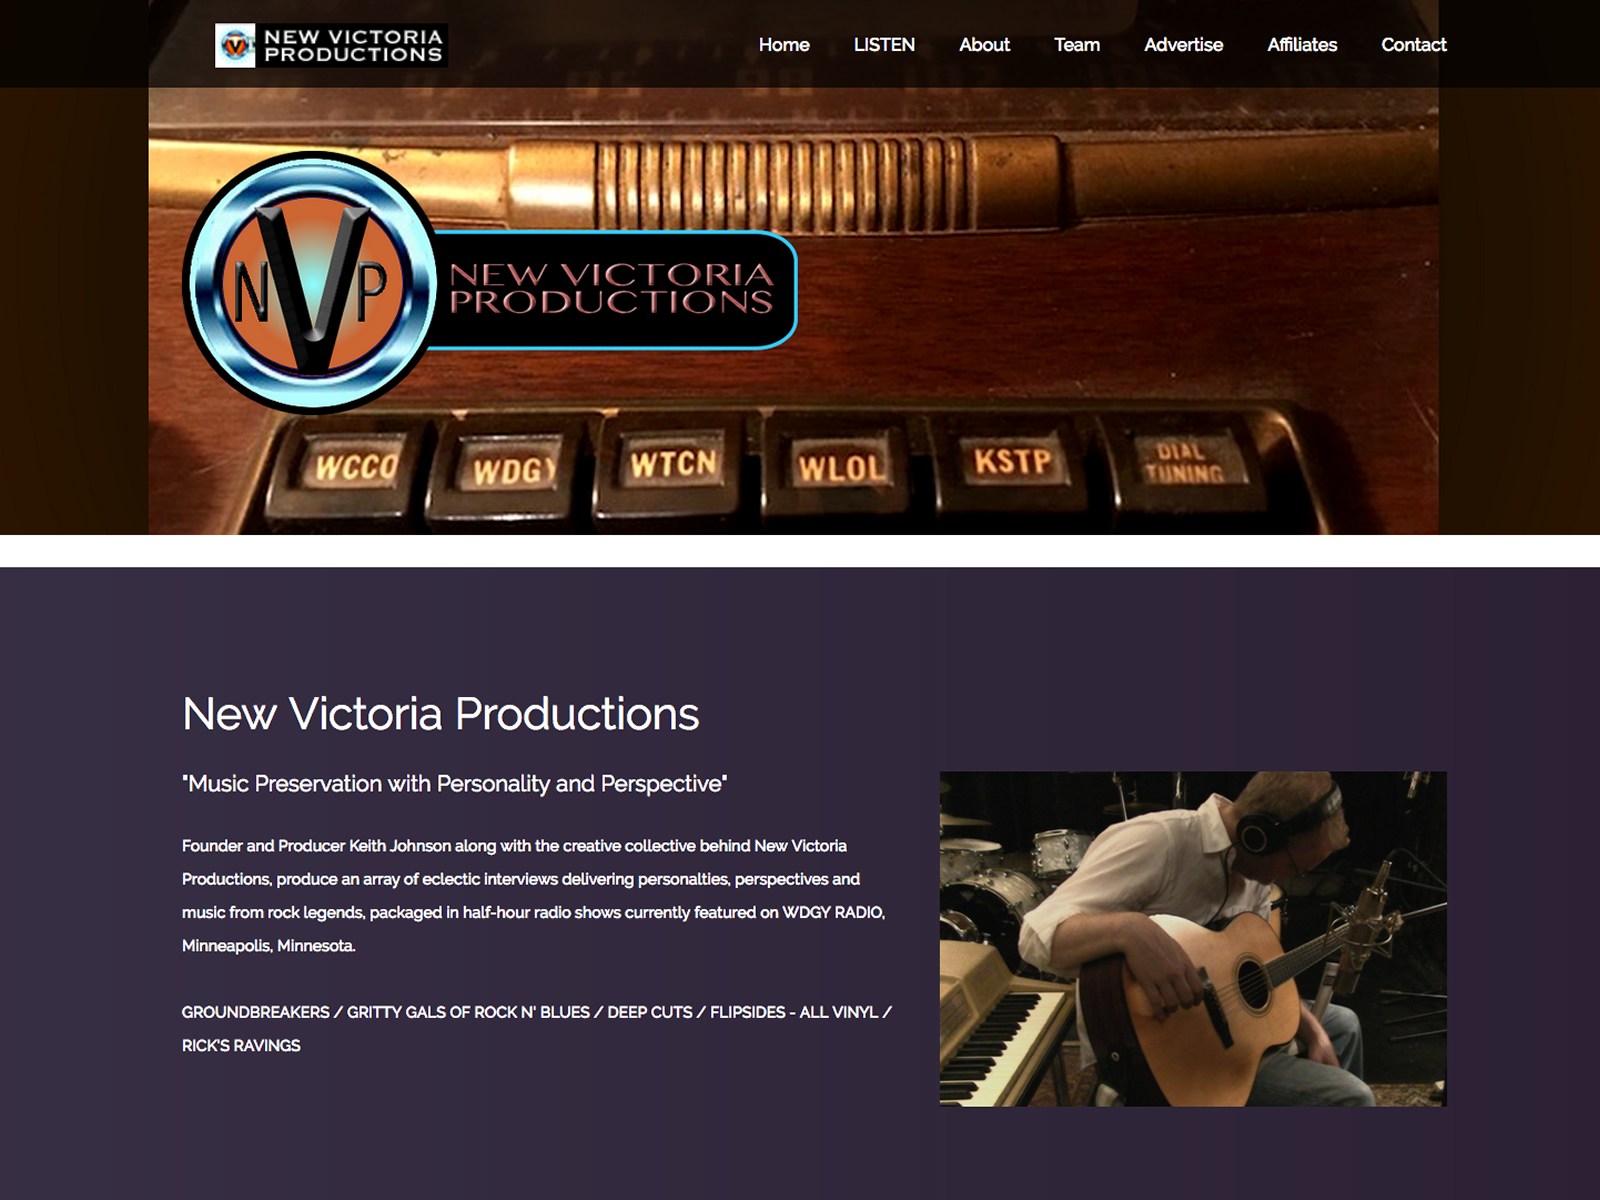 NewVictoriaProductions.com